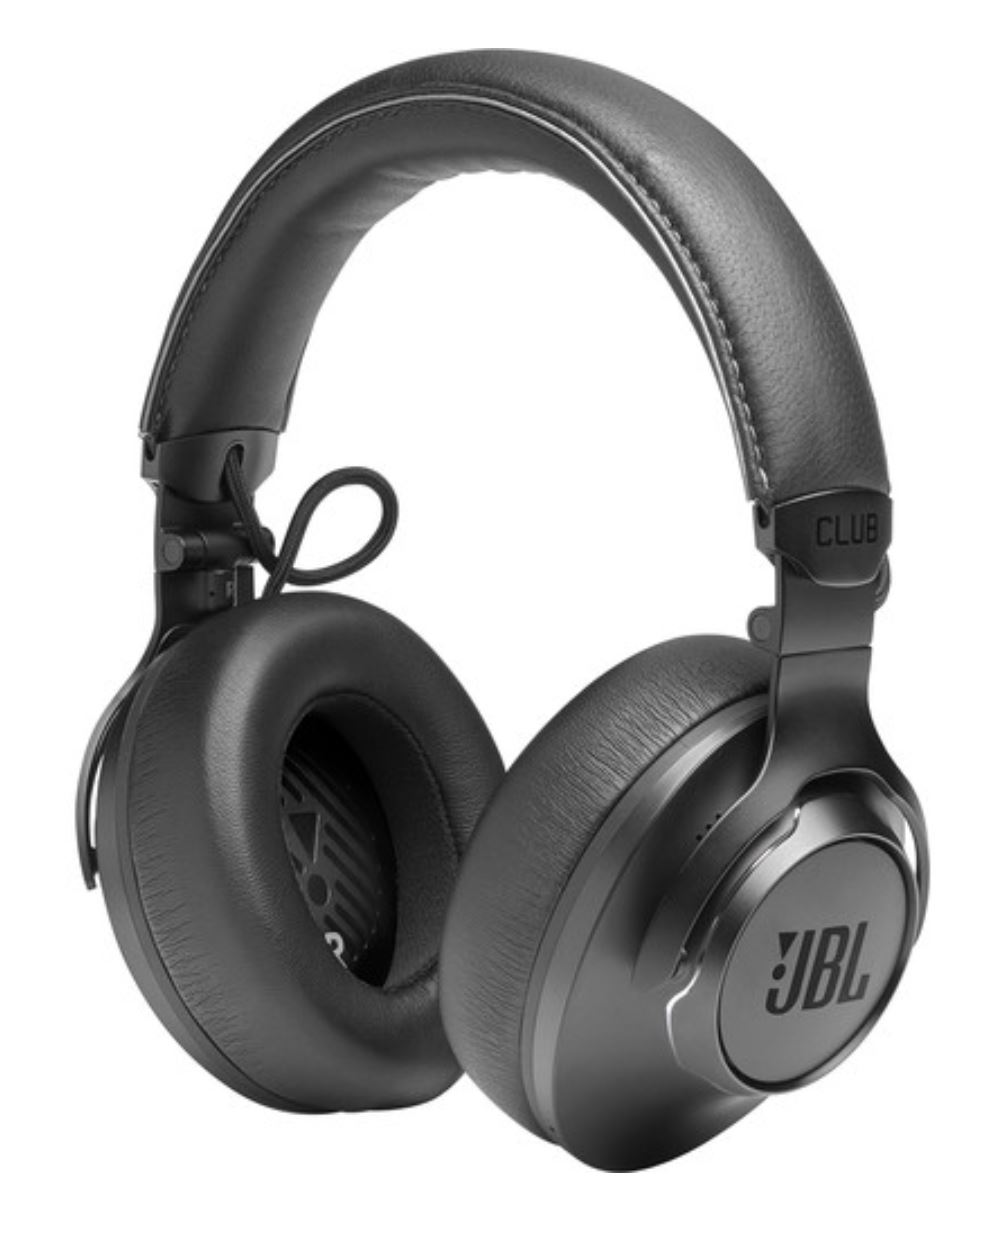 JBL Club ONE Wireless Over-Ear Headphones with Noise Cancelling (Black) - image 4 of 9